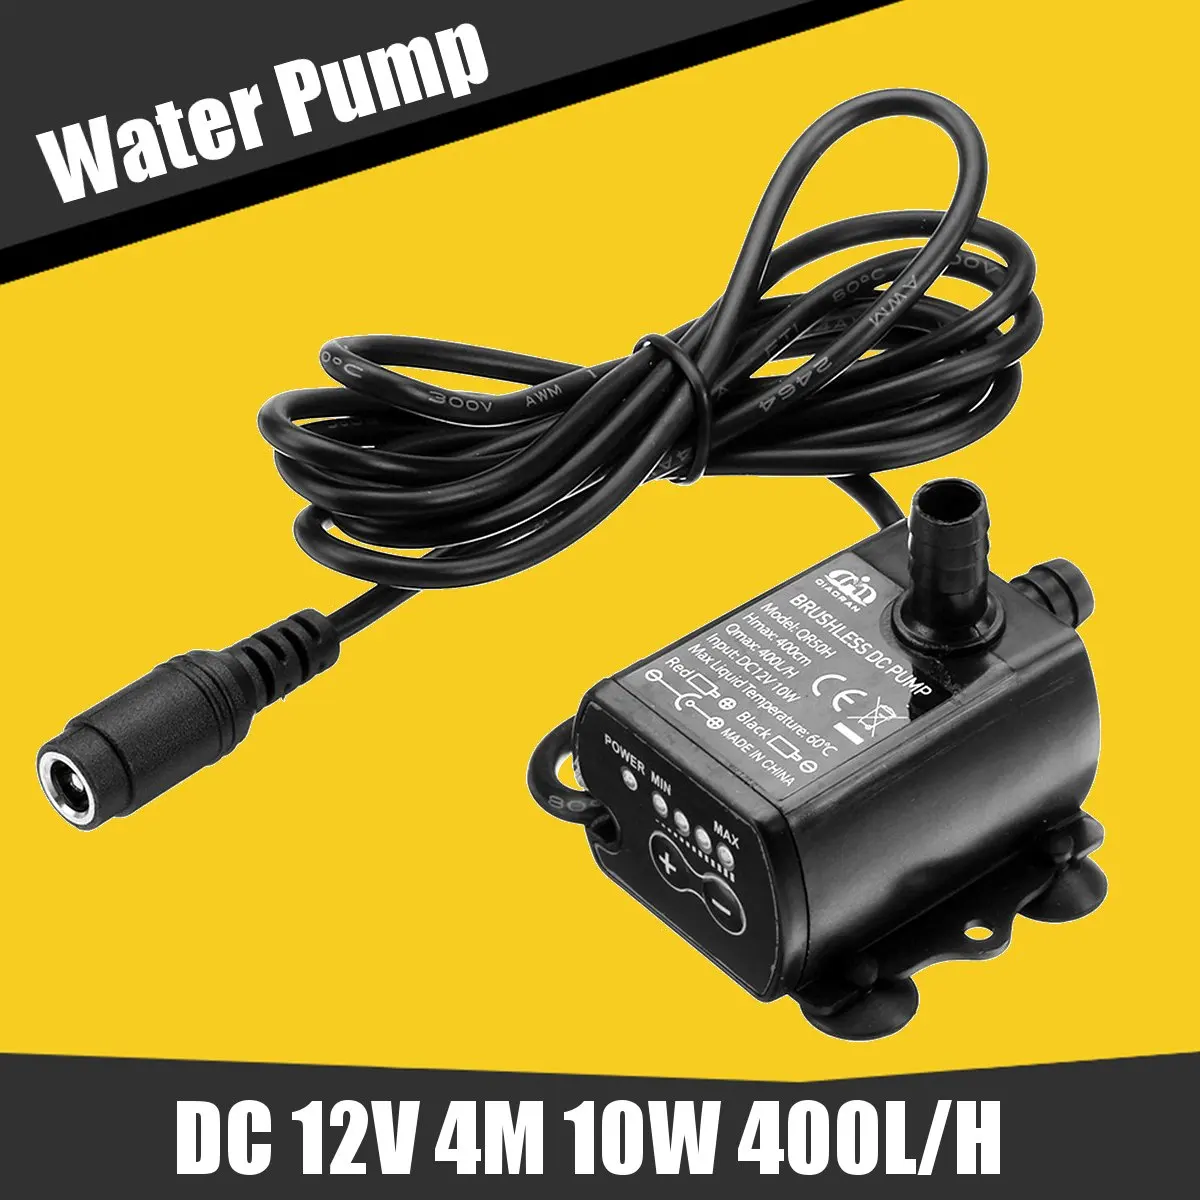 

Water Pump QR50H DC 12V 4M 10W 400L/H Flow Rate Brushless Motor Submersible Pump